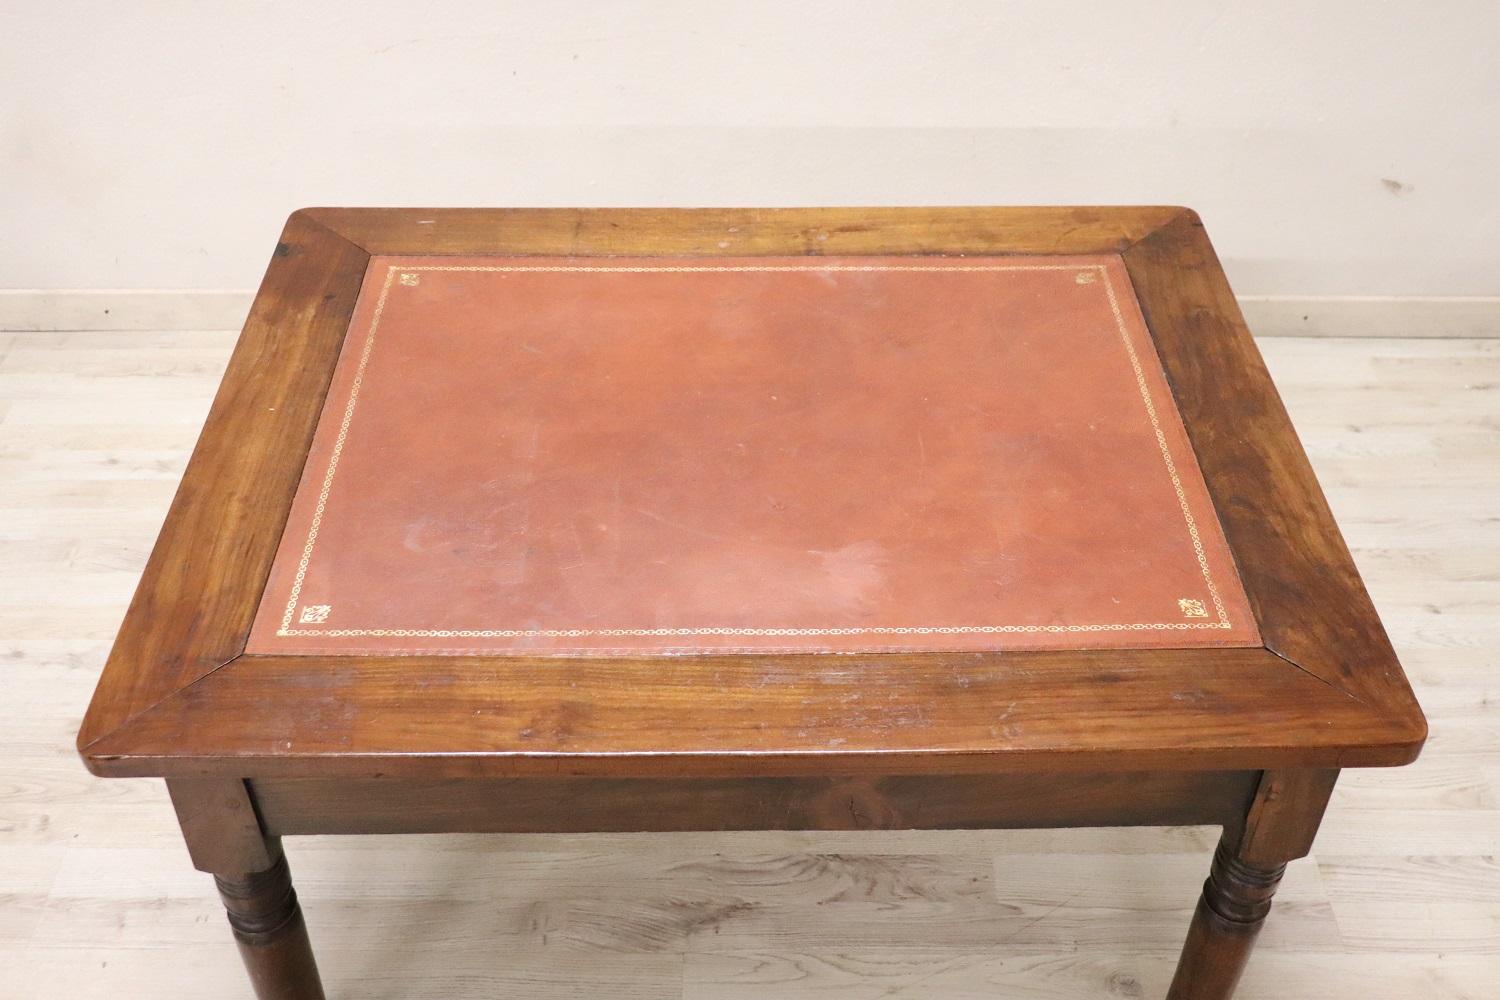 Rare and fine quality Italian antique coffee table or sofa table 1850. The table is in precious cherry wood. characterized by a simple line with turned legs. The top is covered in light brown imitation leather enriched by a border with a classic